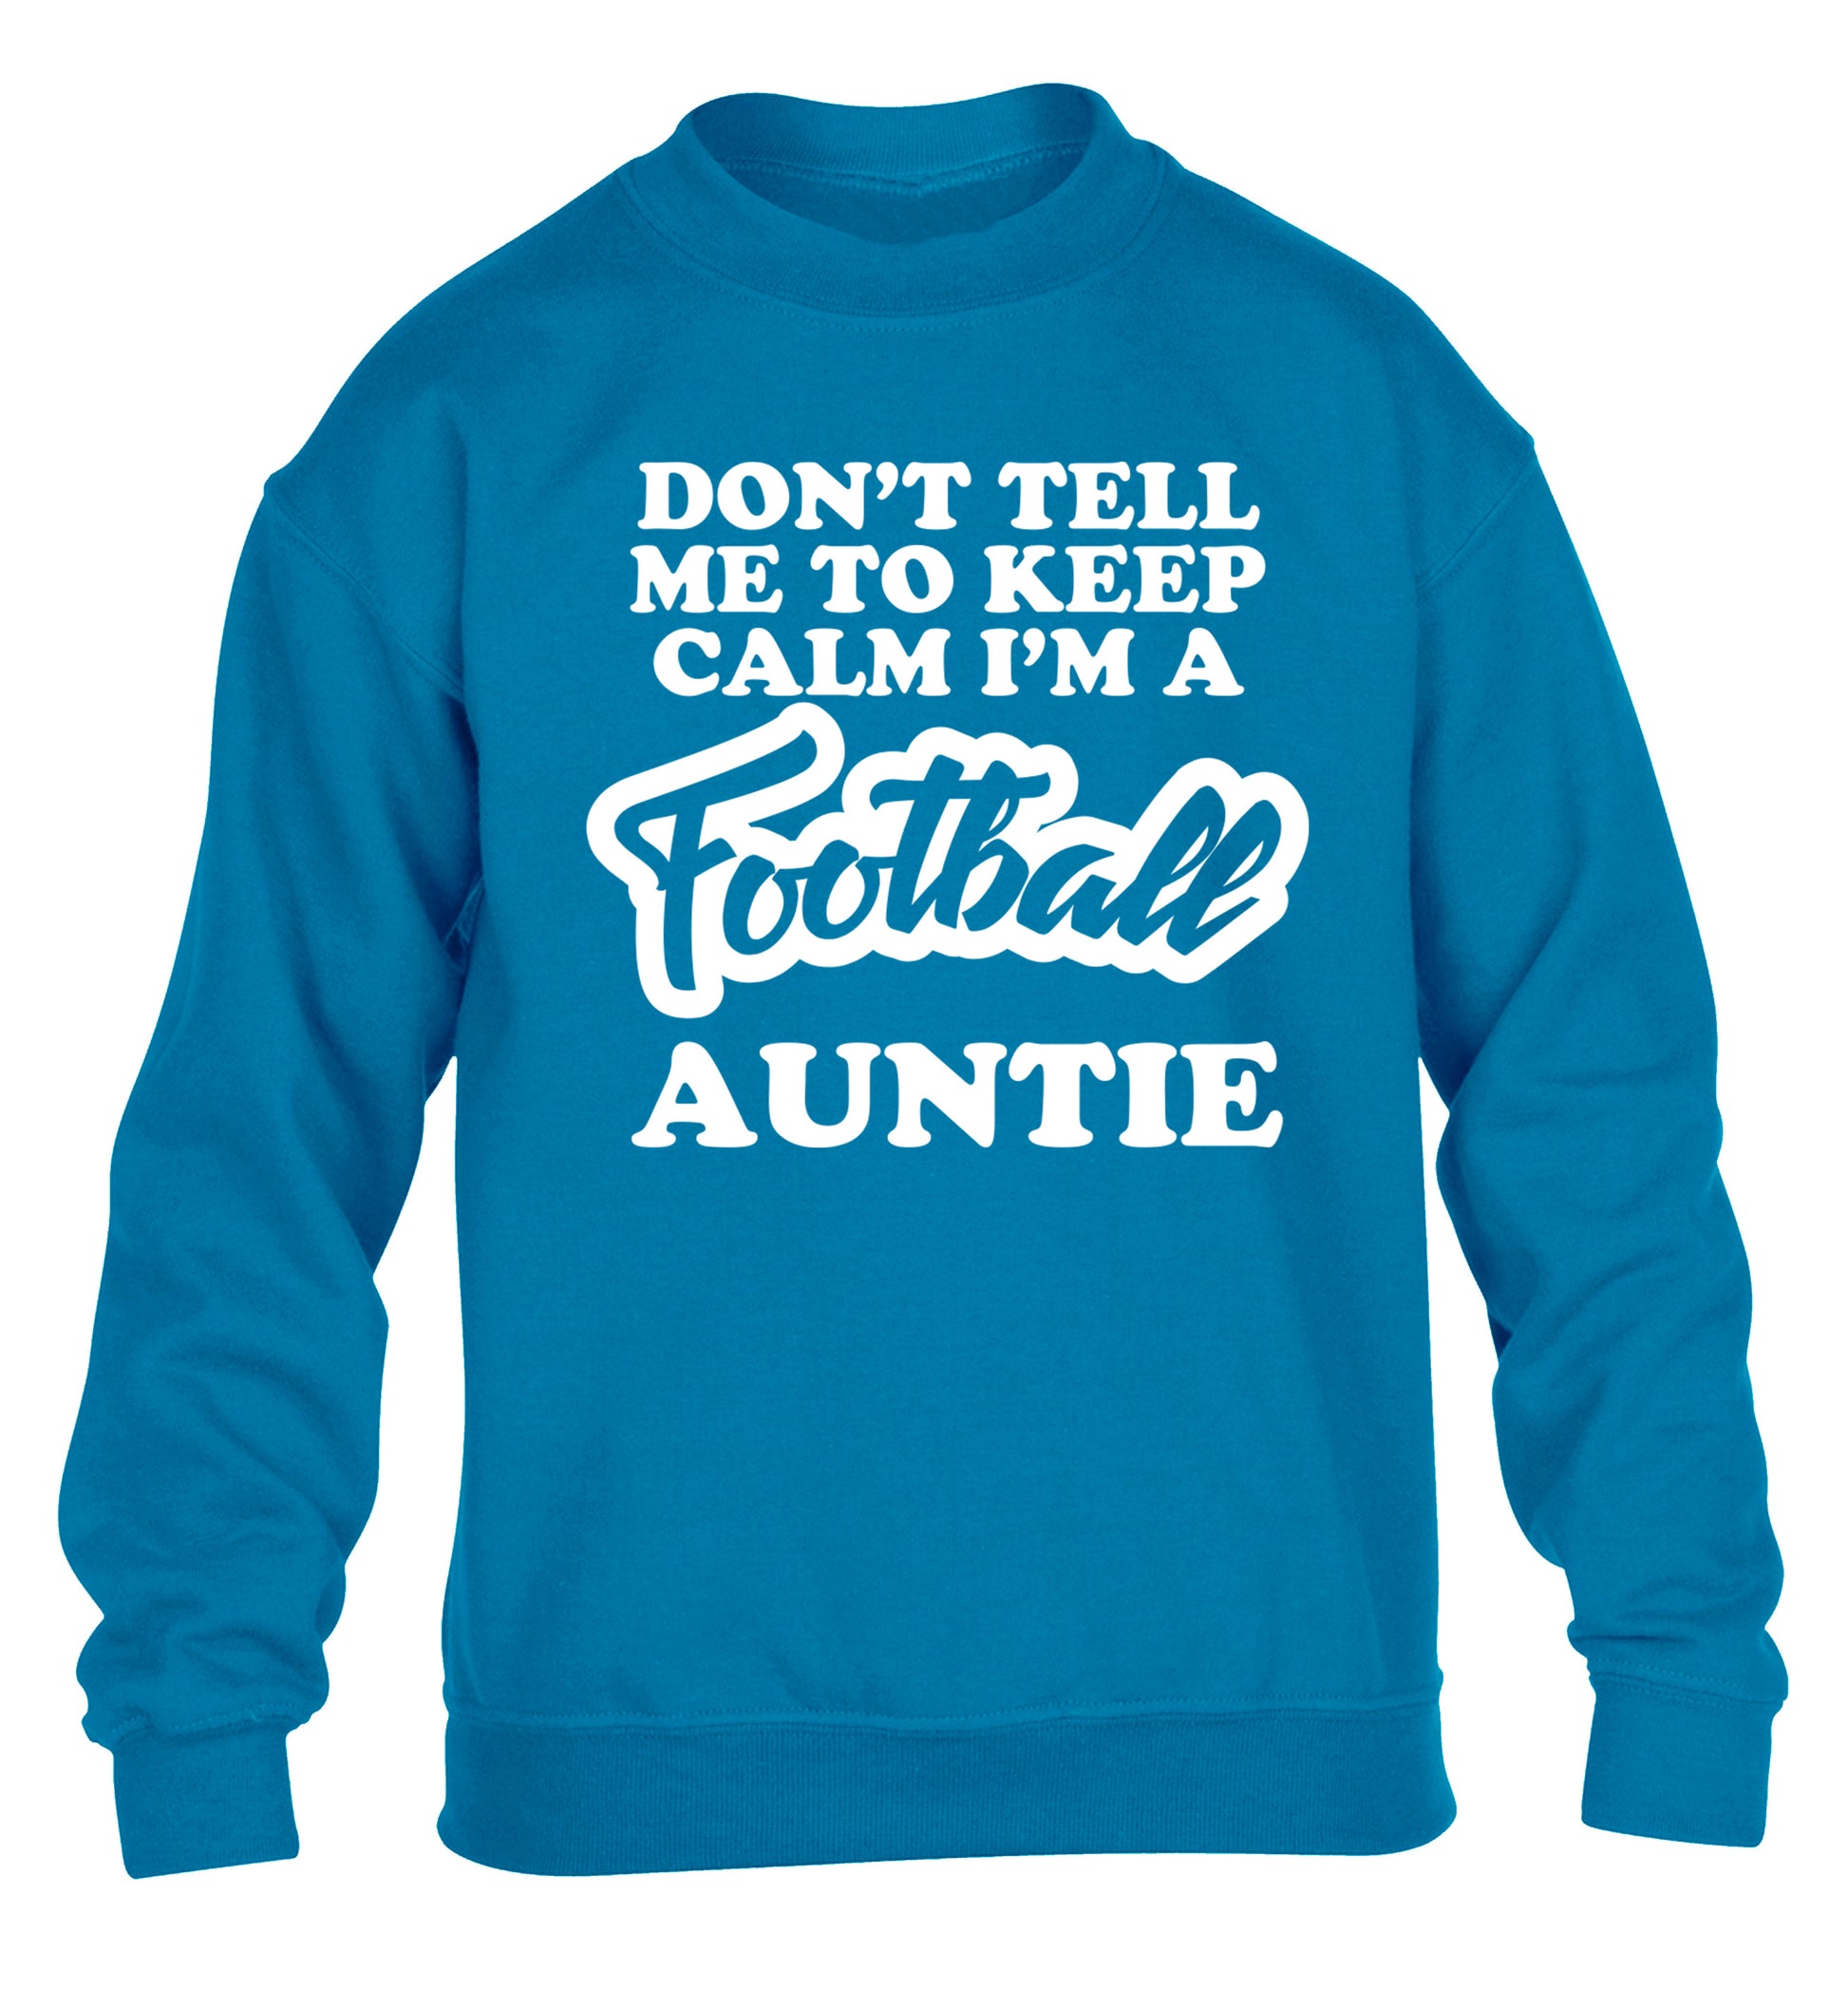 Don't tell me to keep calm I'm a football auntie children's blue sweater 12-14 Years